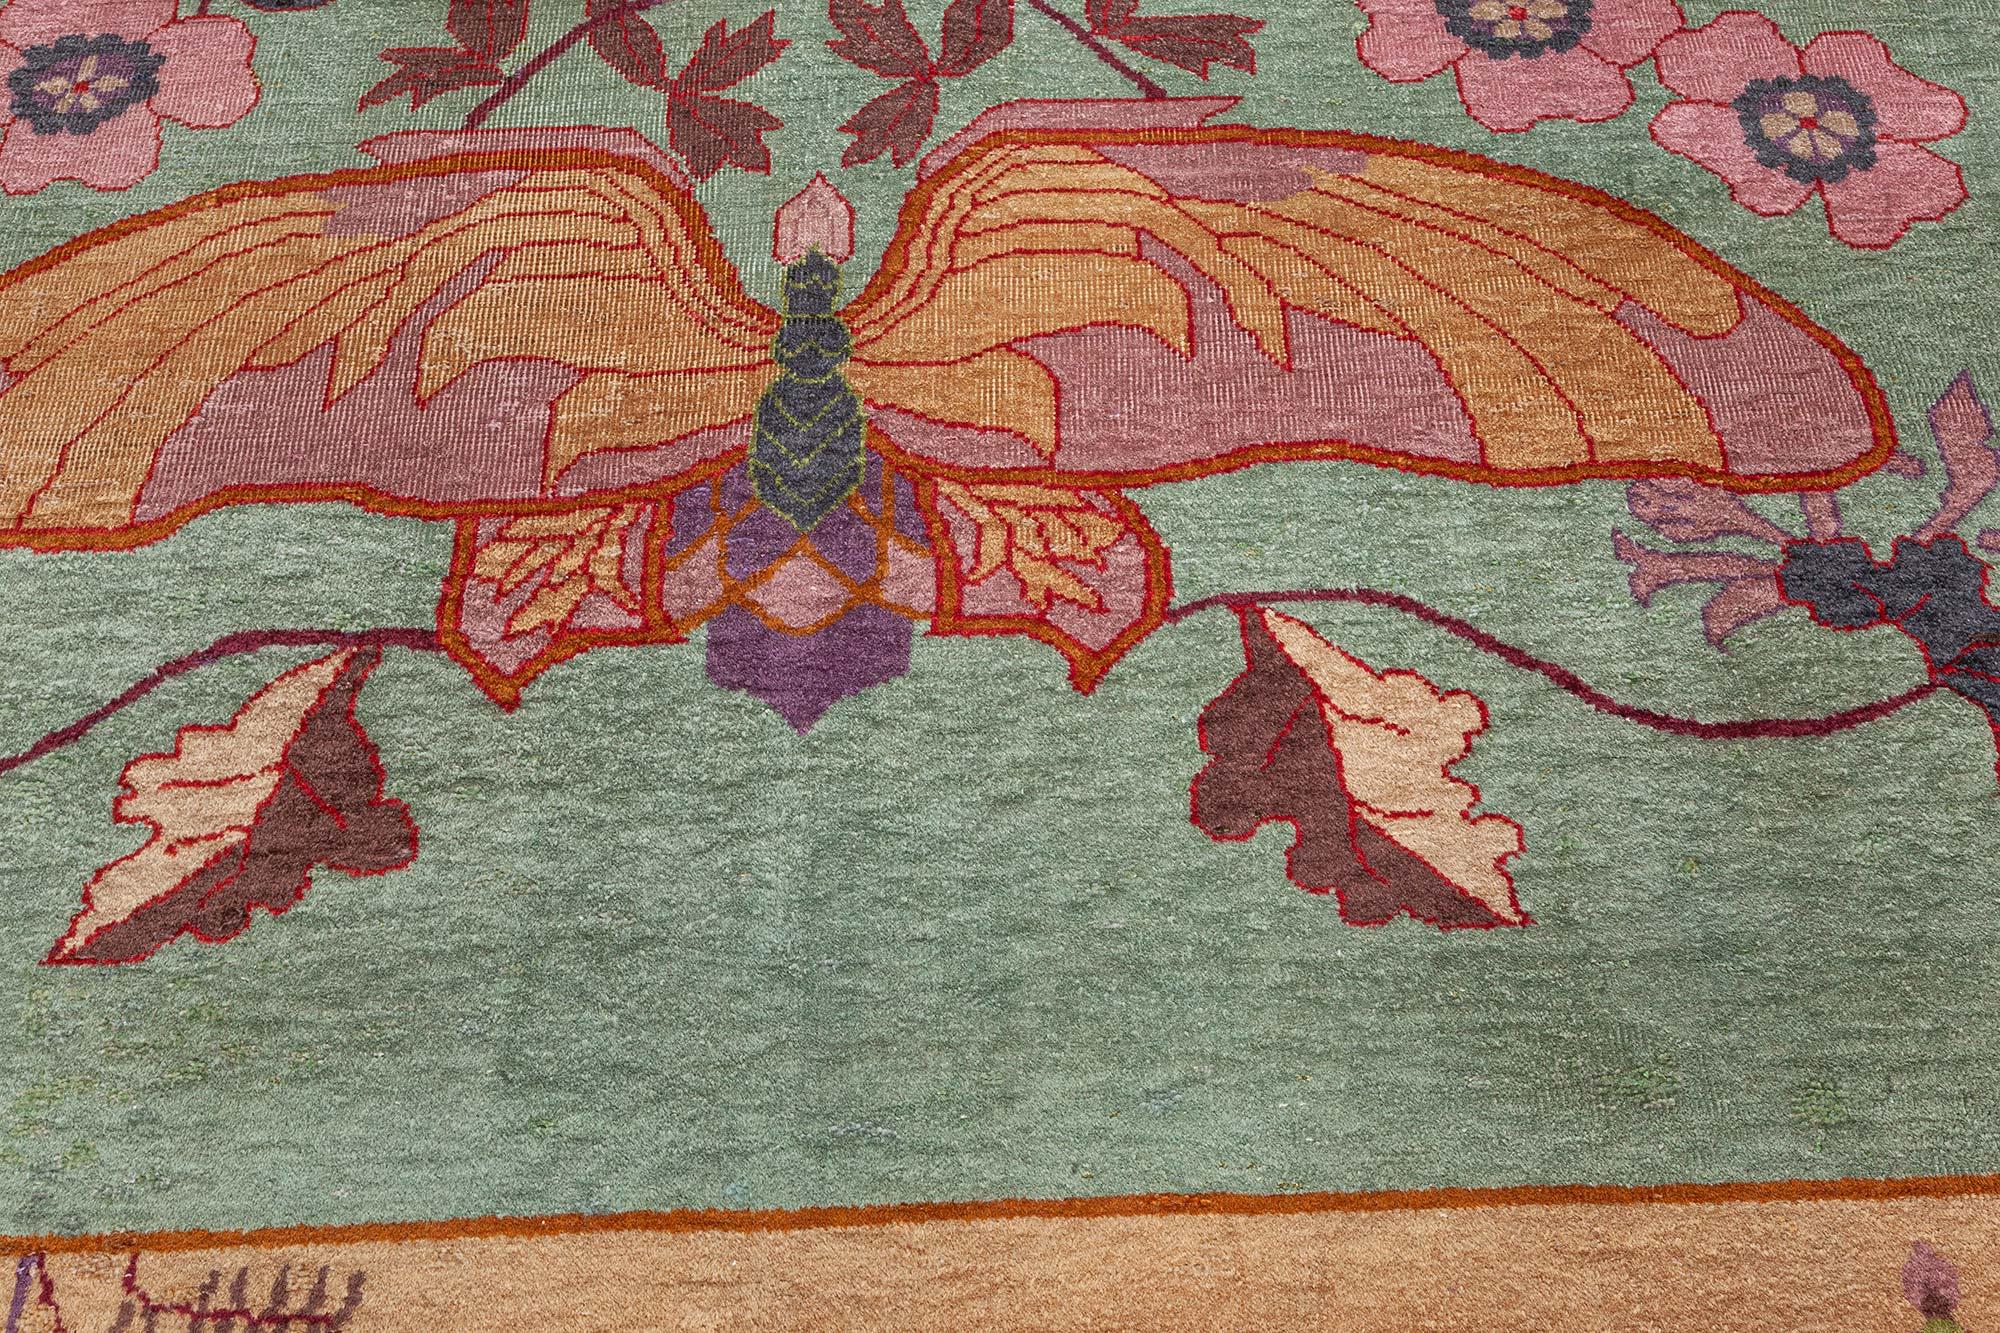 Chinese Art Deco Rug
Size: 9'10